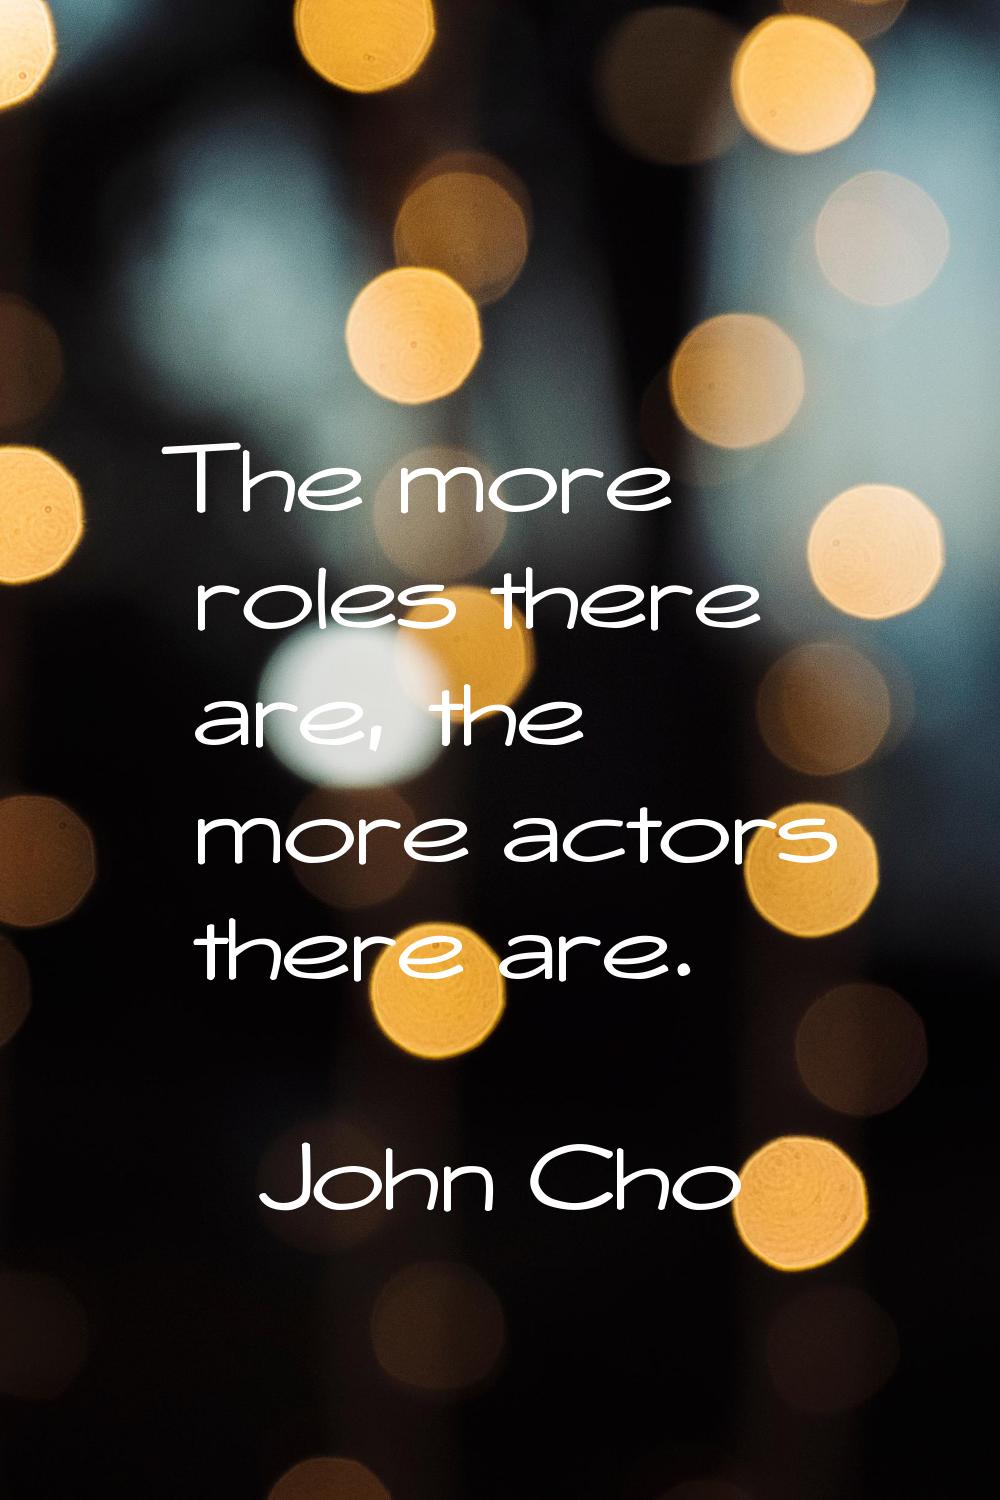 The more roles there are, the more actors there are.